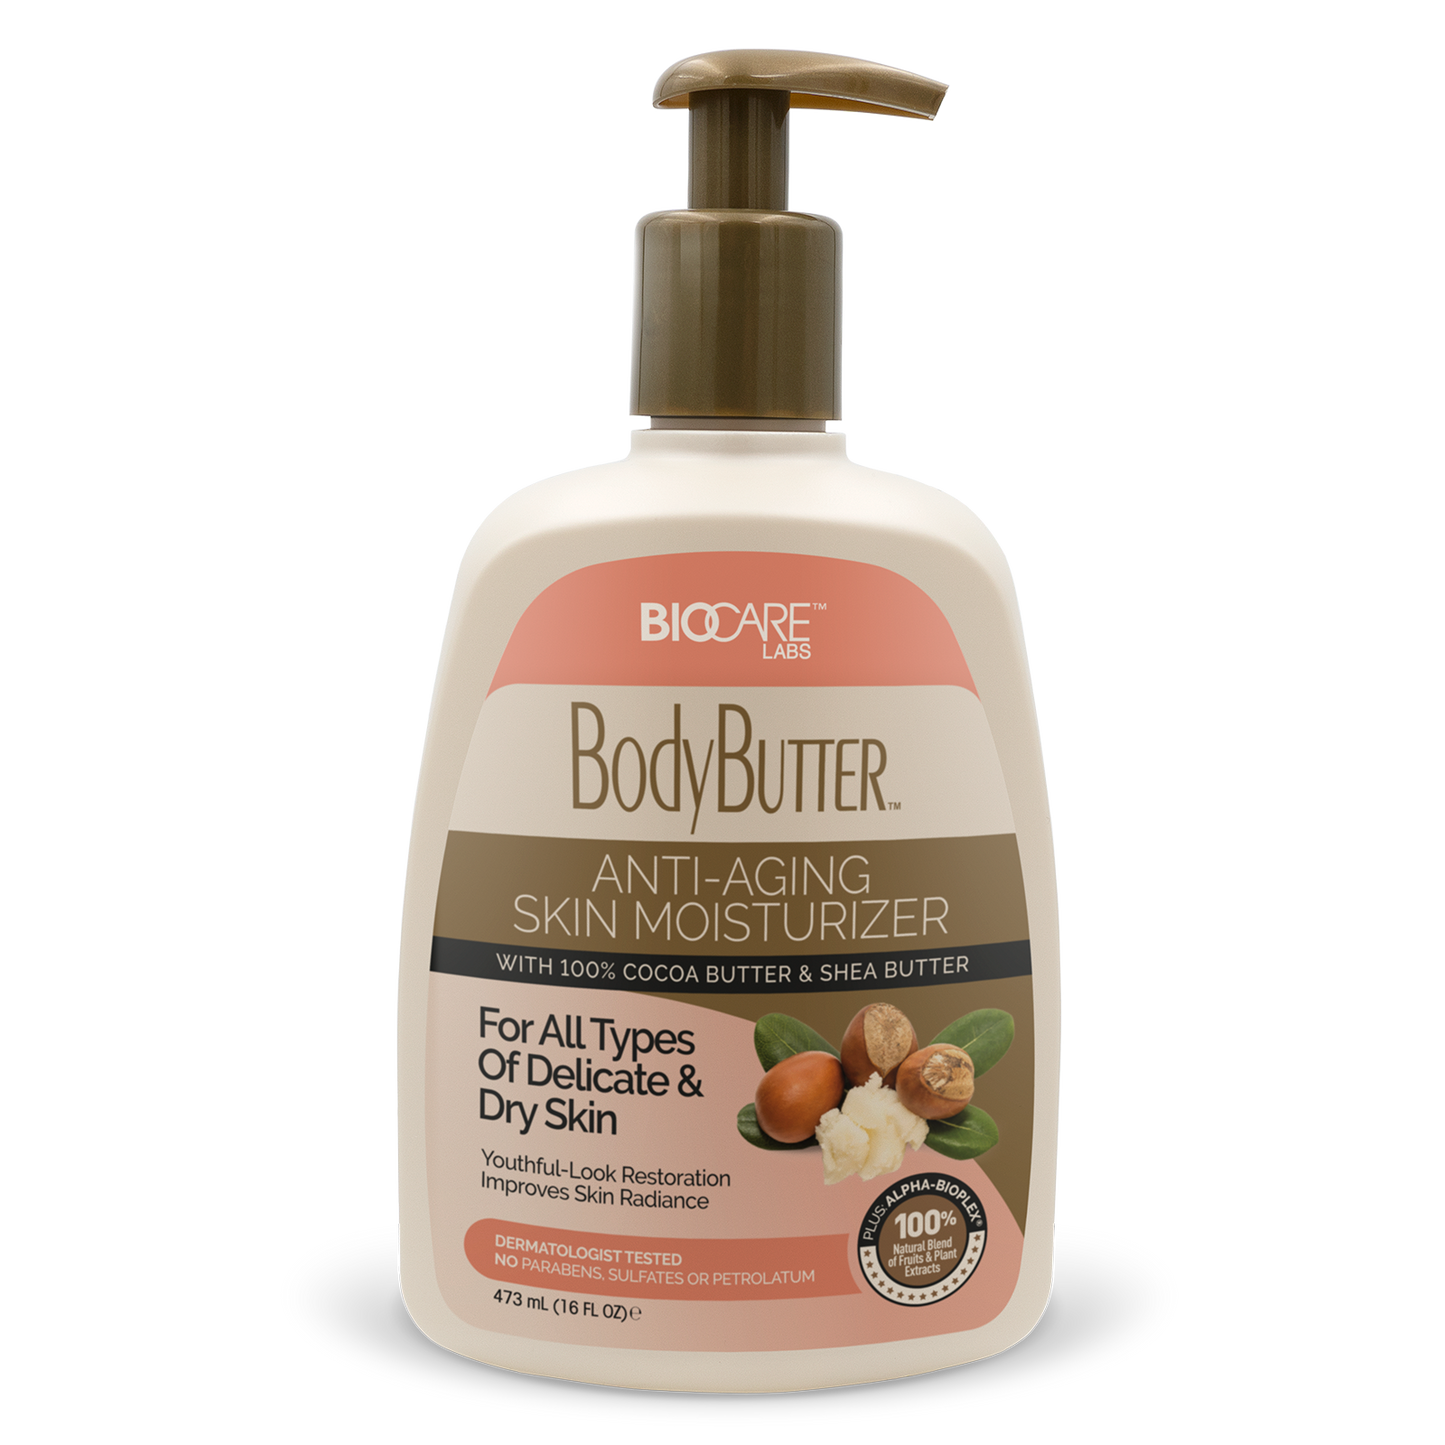  Bottle of BodyButter With Cocoa Butter & Shea Butter